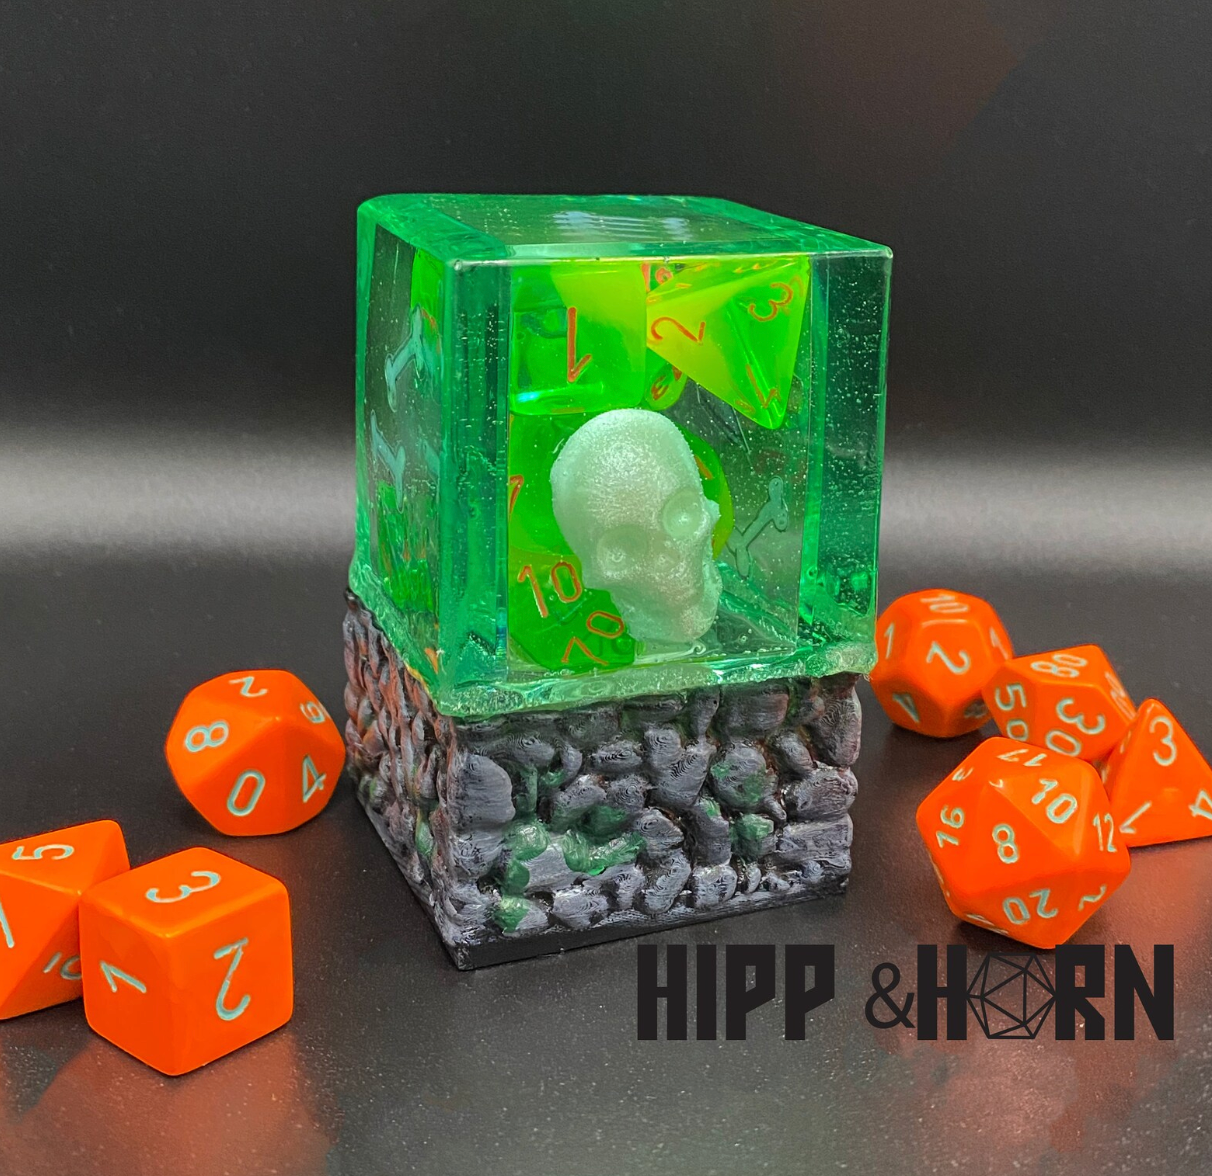 The Cube Light-Up Dice Holder